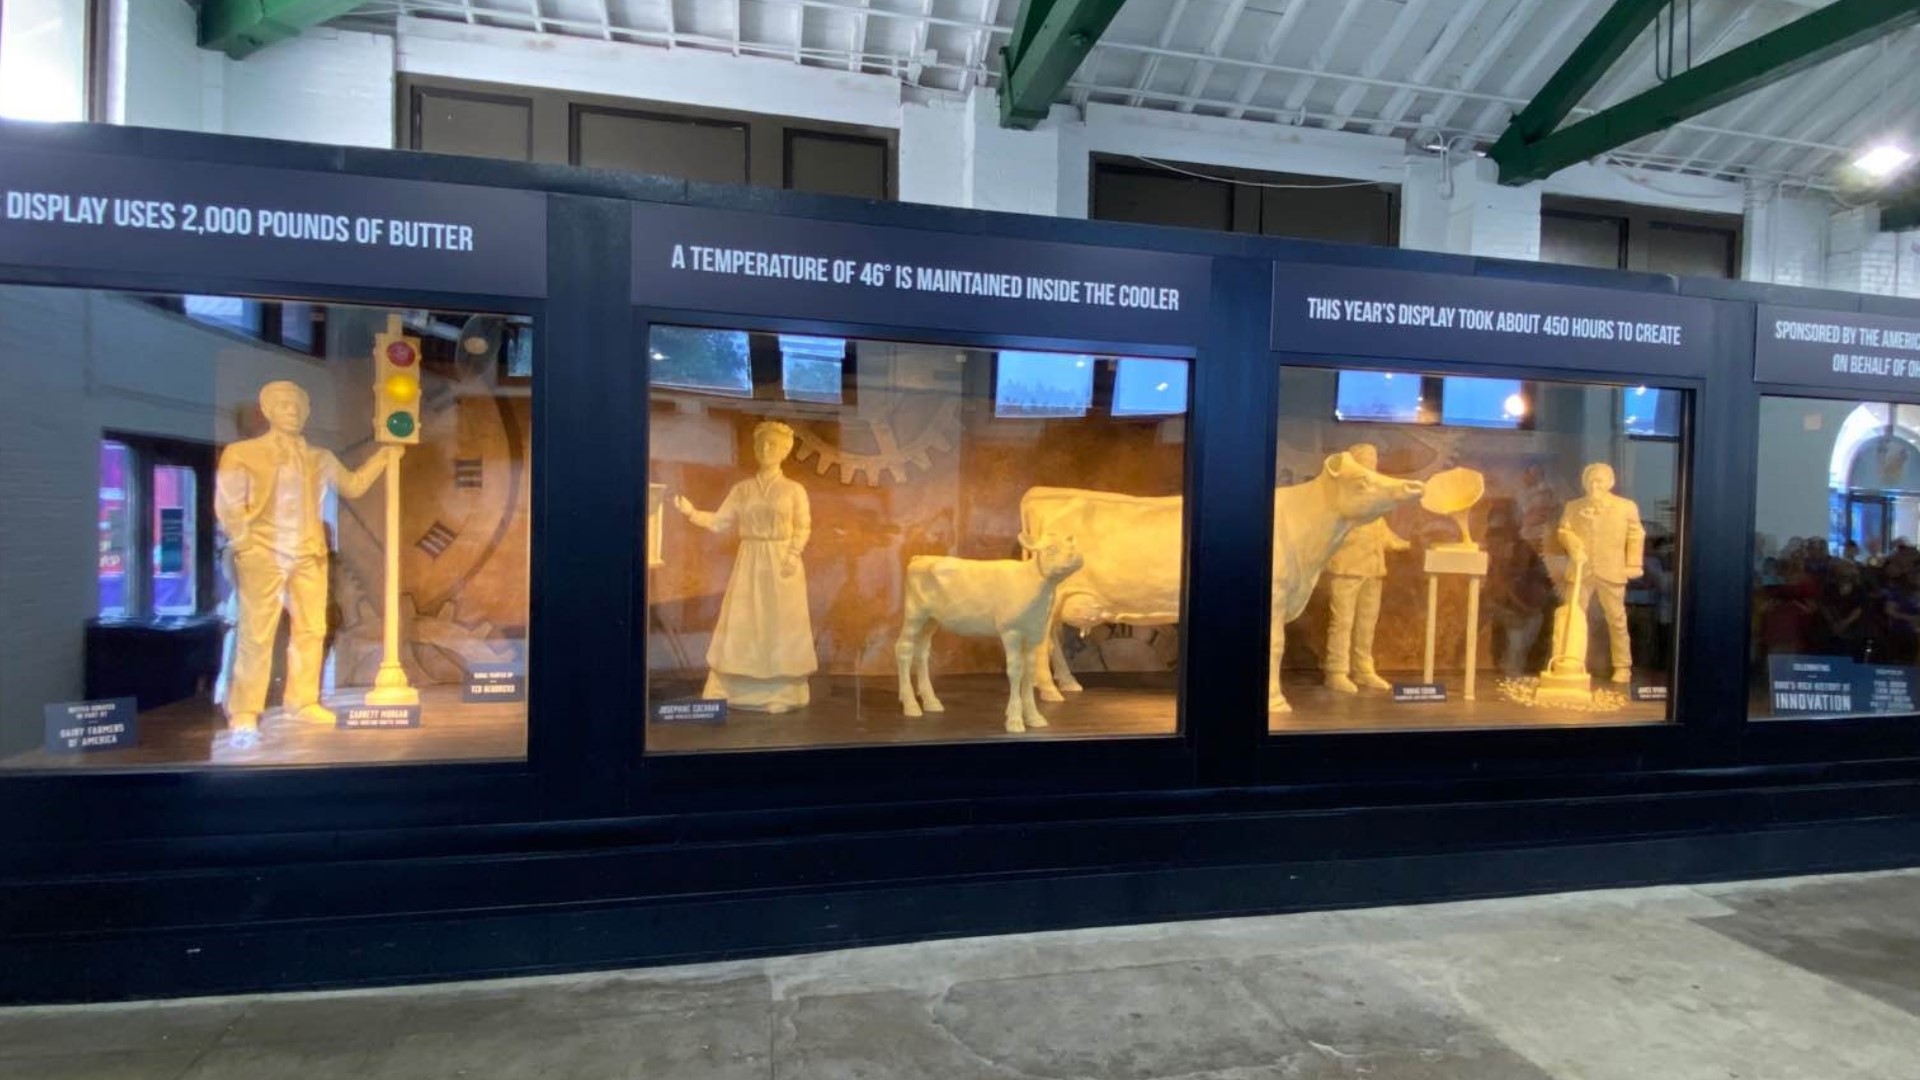 2023 Ohio State Fair butter display revealed